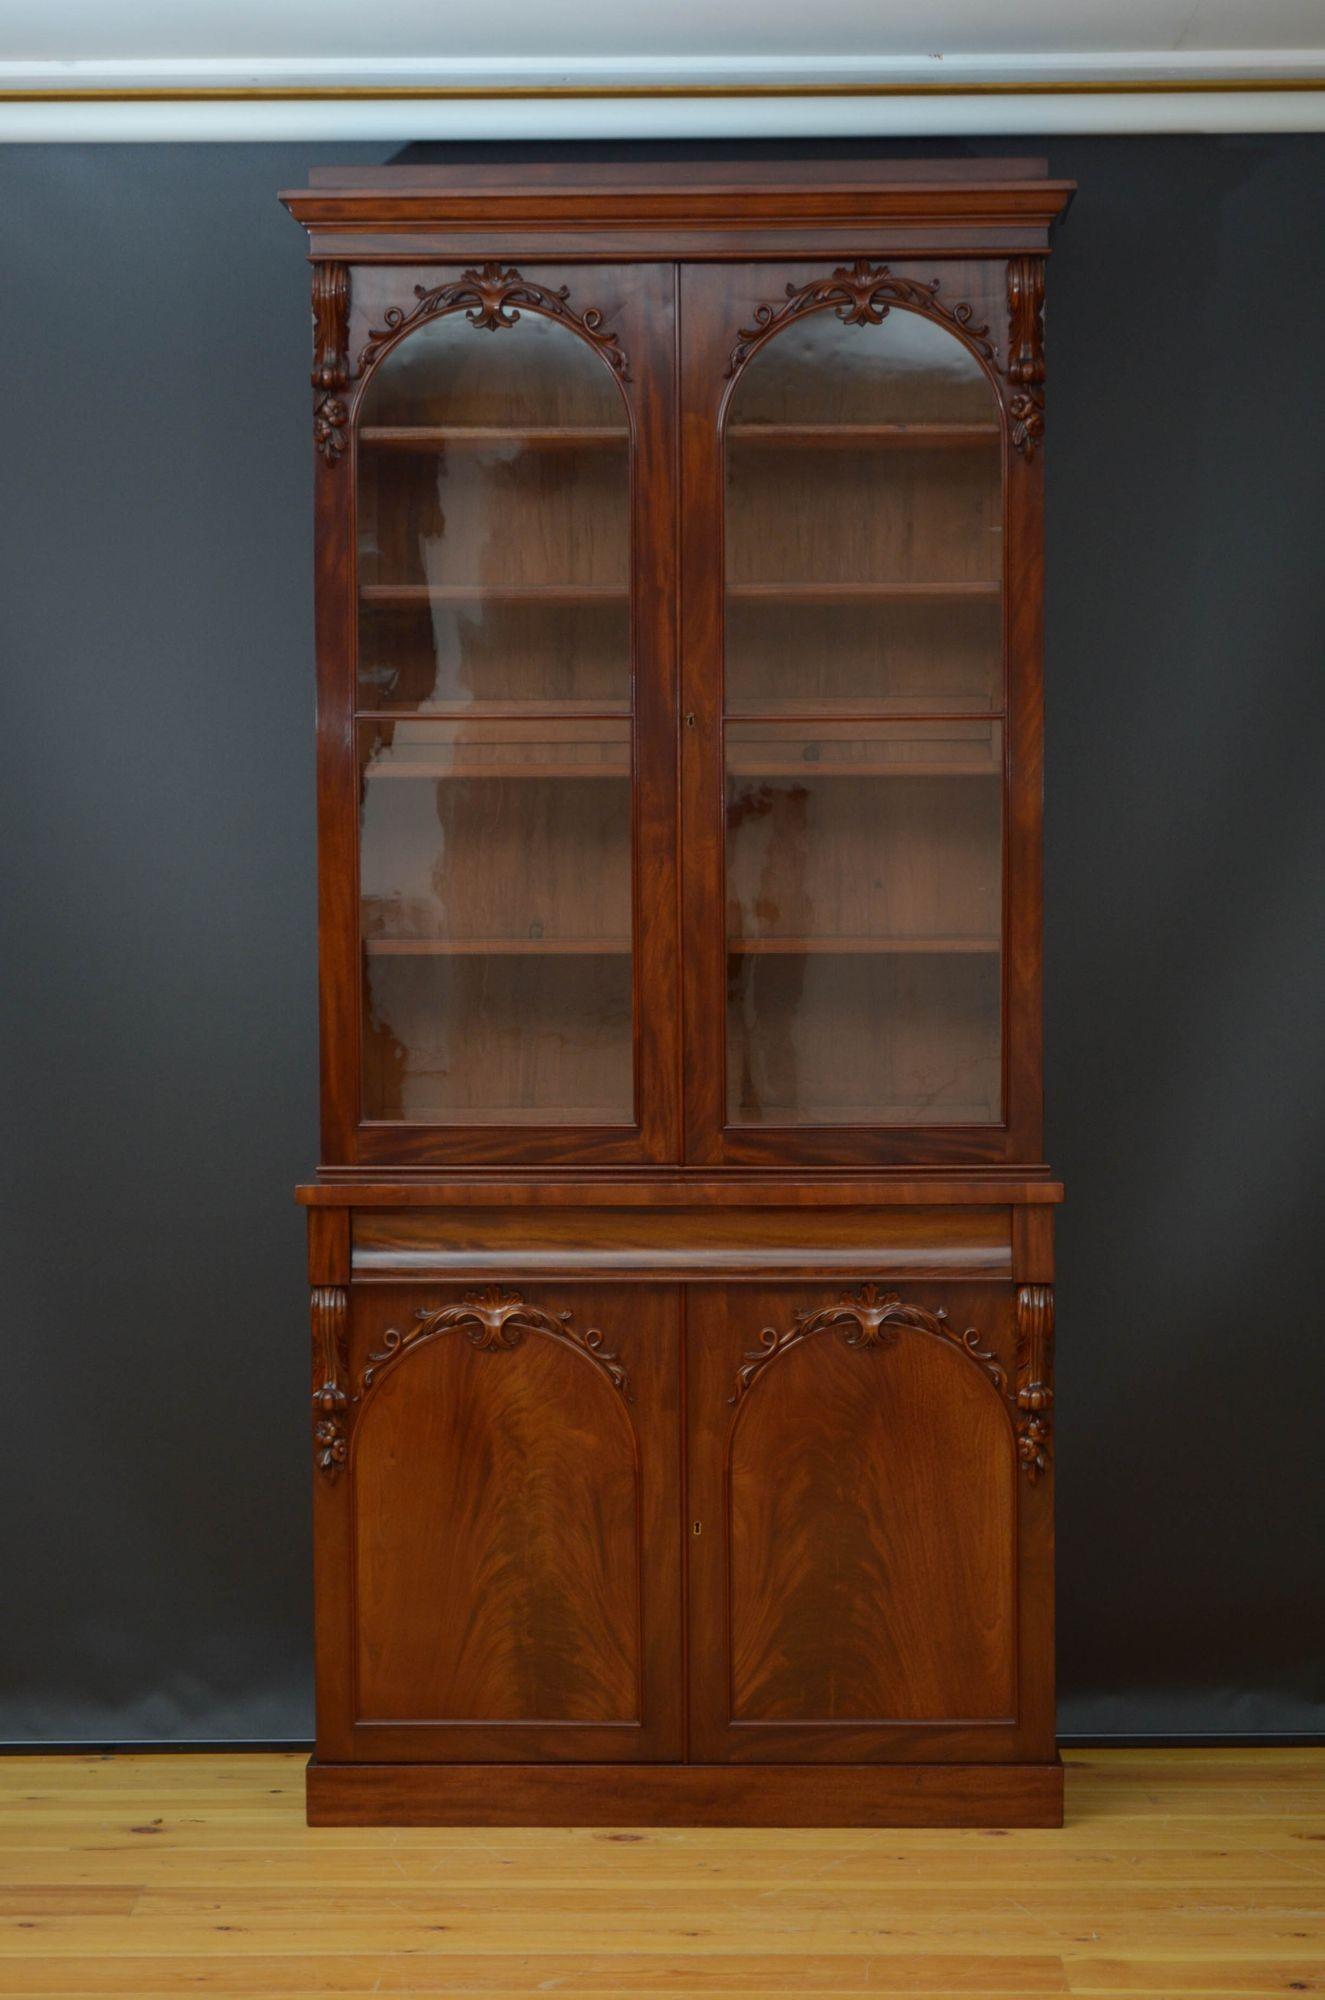 Sn5178 Fine quality and very elegant Victorian mahogany bookcase, having cavetto cornice above a pair of arched, glazed doors with decorative carvings, fitted with original working lock and a key and enclosing four height adjustable shelves, all